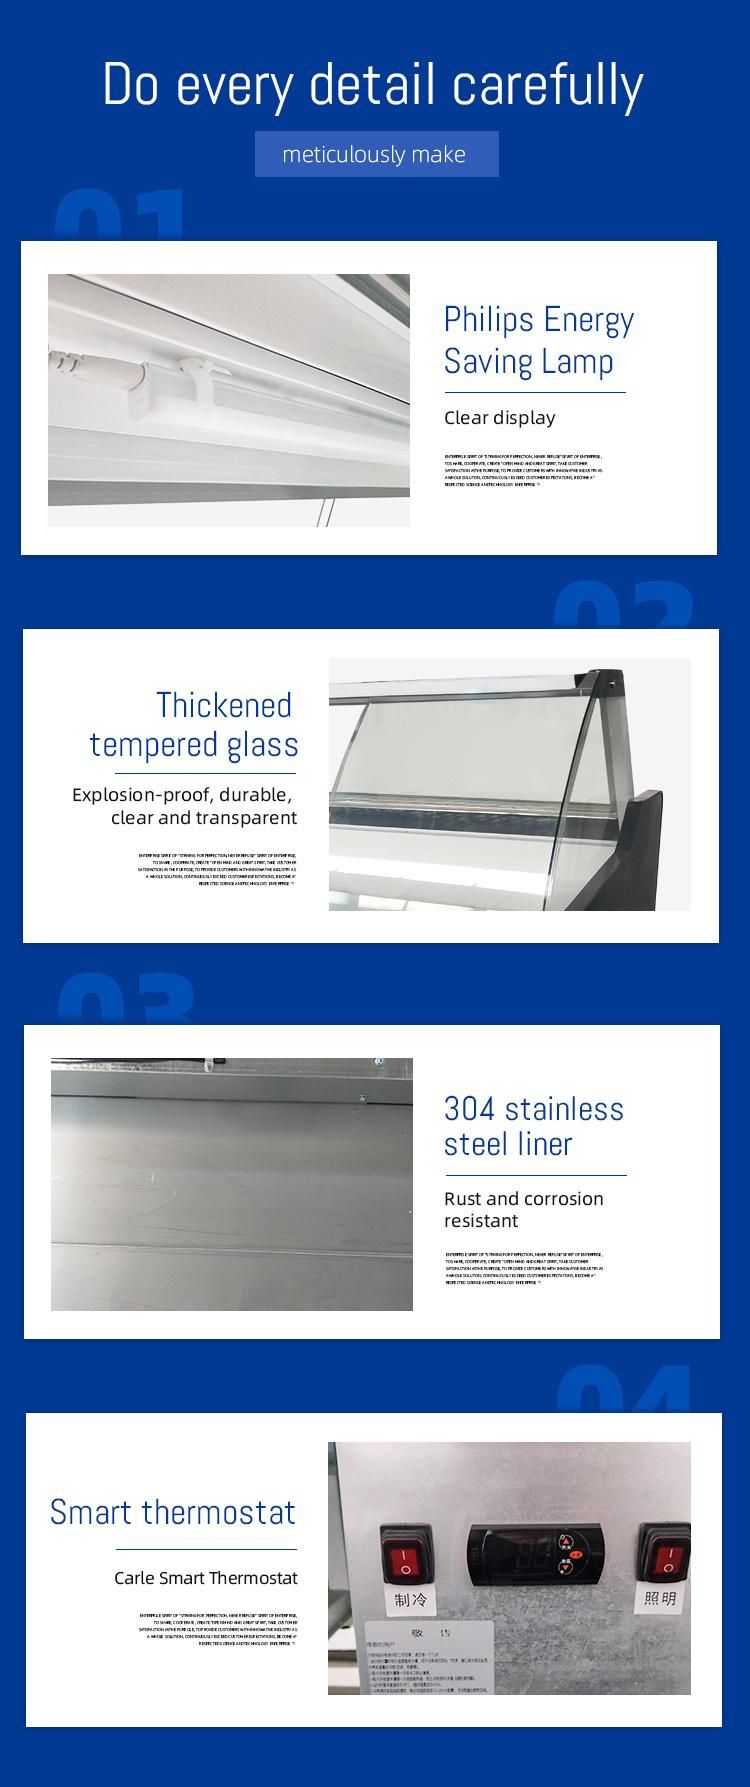 Butcher′ S Glass Door Commercial Refrigerator Showcase for Meat